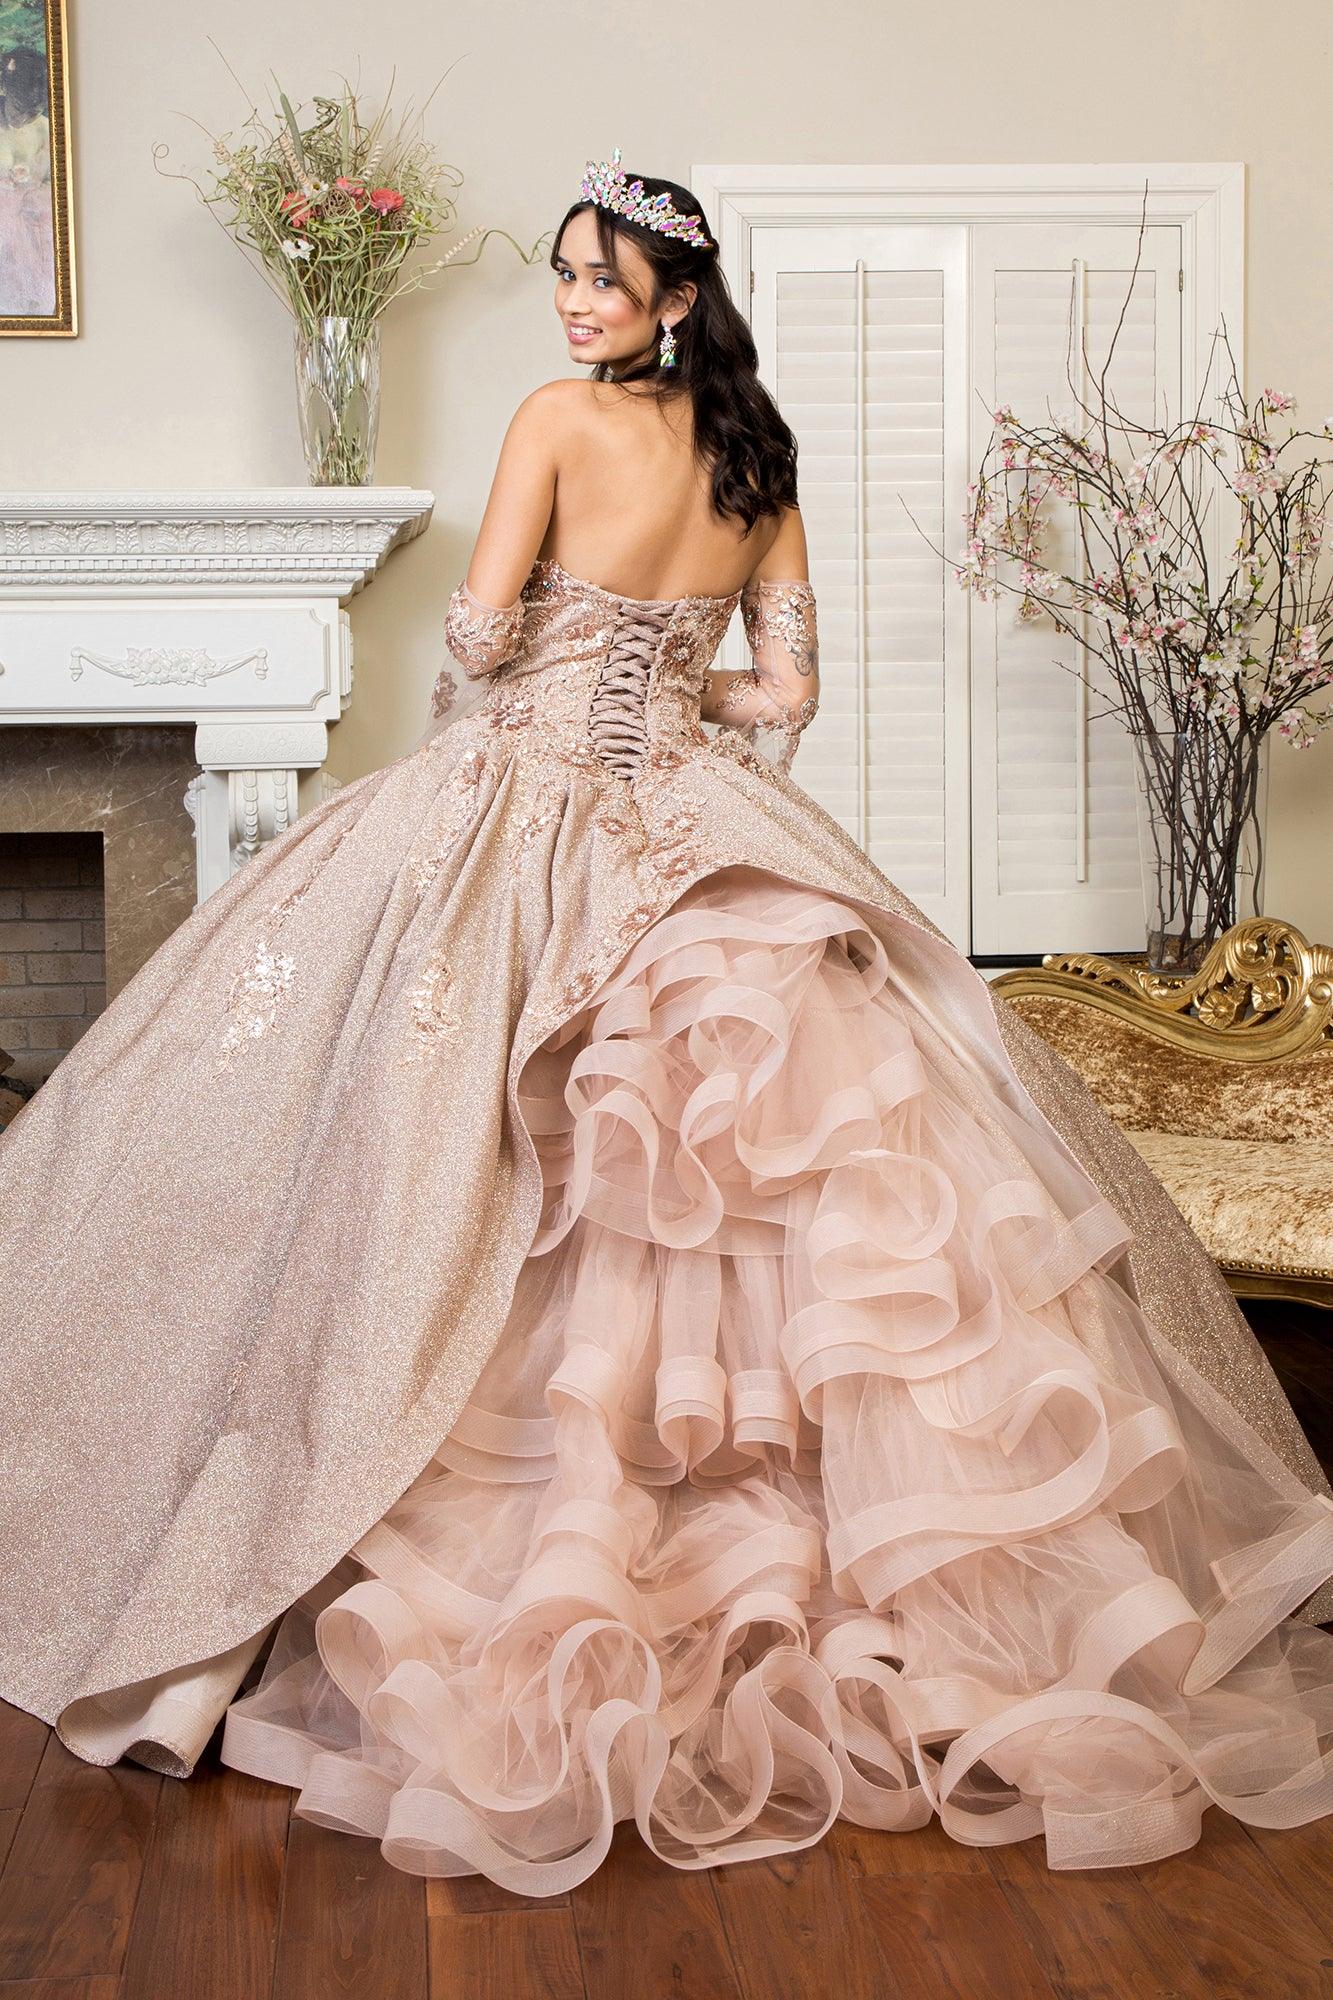 Long Ball Gown Strapless Quinceanera Dress - The Dress Outlet